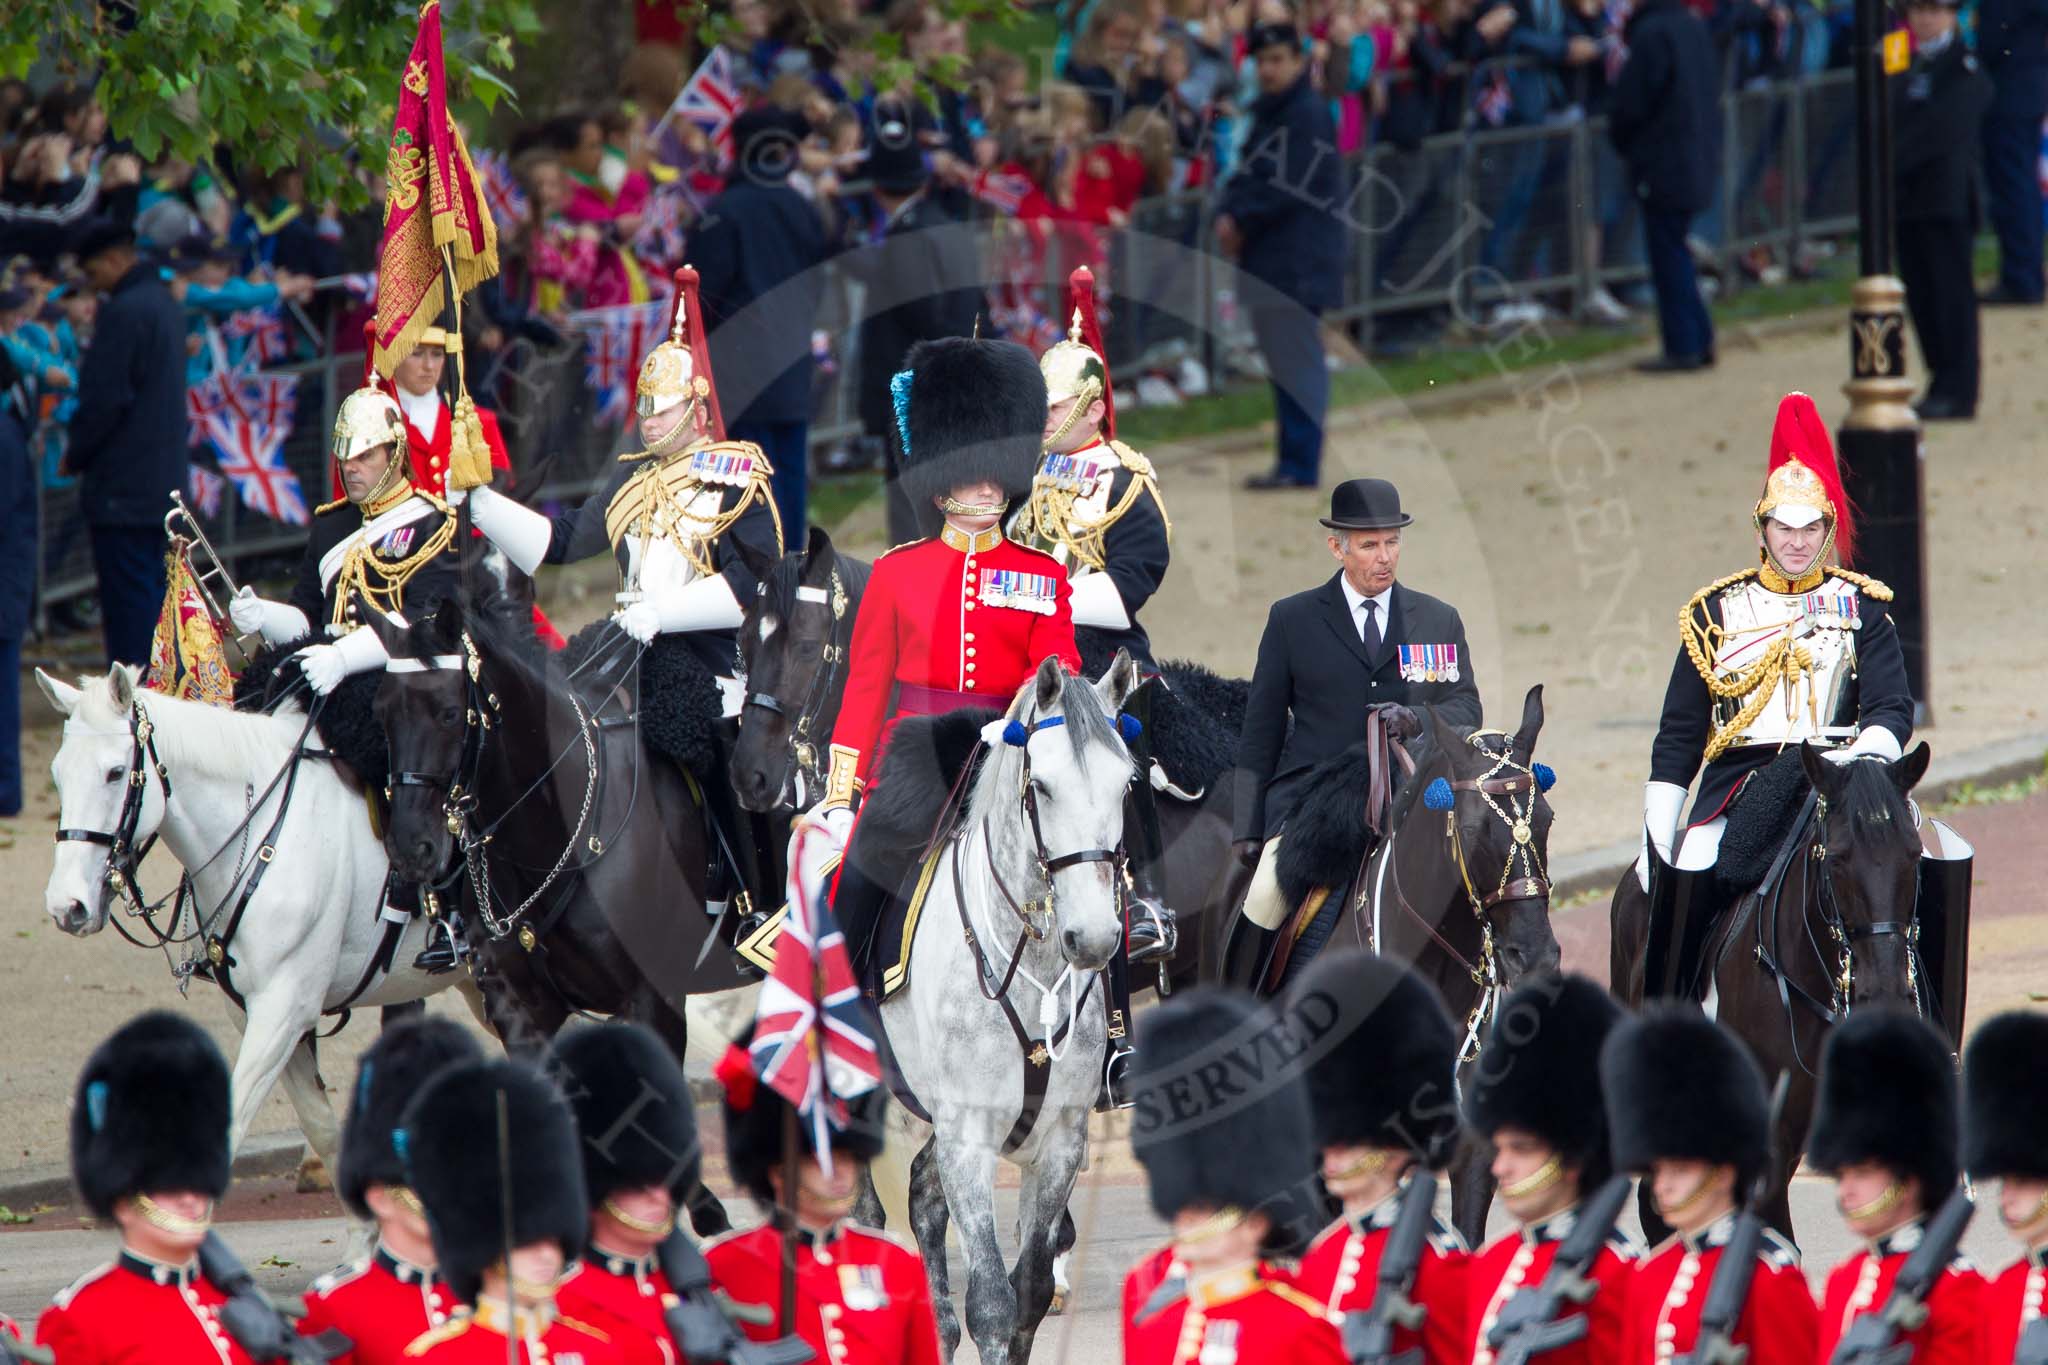 The Colonel's Review 2012: Representing the Royal Colonels (guessing here!): On the left, a Captain of the Irish Guards, riding the horse of the Duke of Cambridge, in the middle the Queen's Stud Groom, riding the Prince of Wales's horse, and on the right a Lieutenant Colonel of the Blues and Royal, riding the horse of the Princess Royal..
Horse Guards Parade, Westminster,
London SW1,

United Kingdom,
on 09 June 2012 at 10:57, image #146